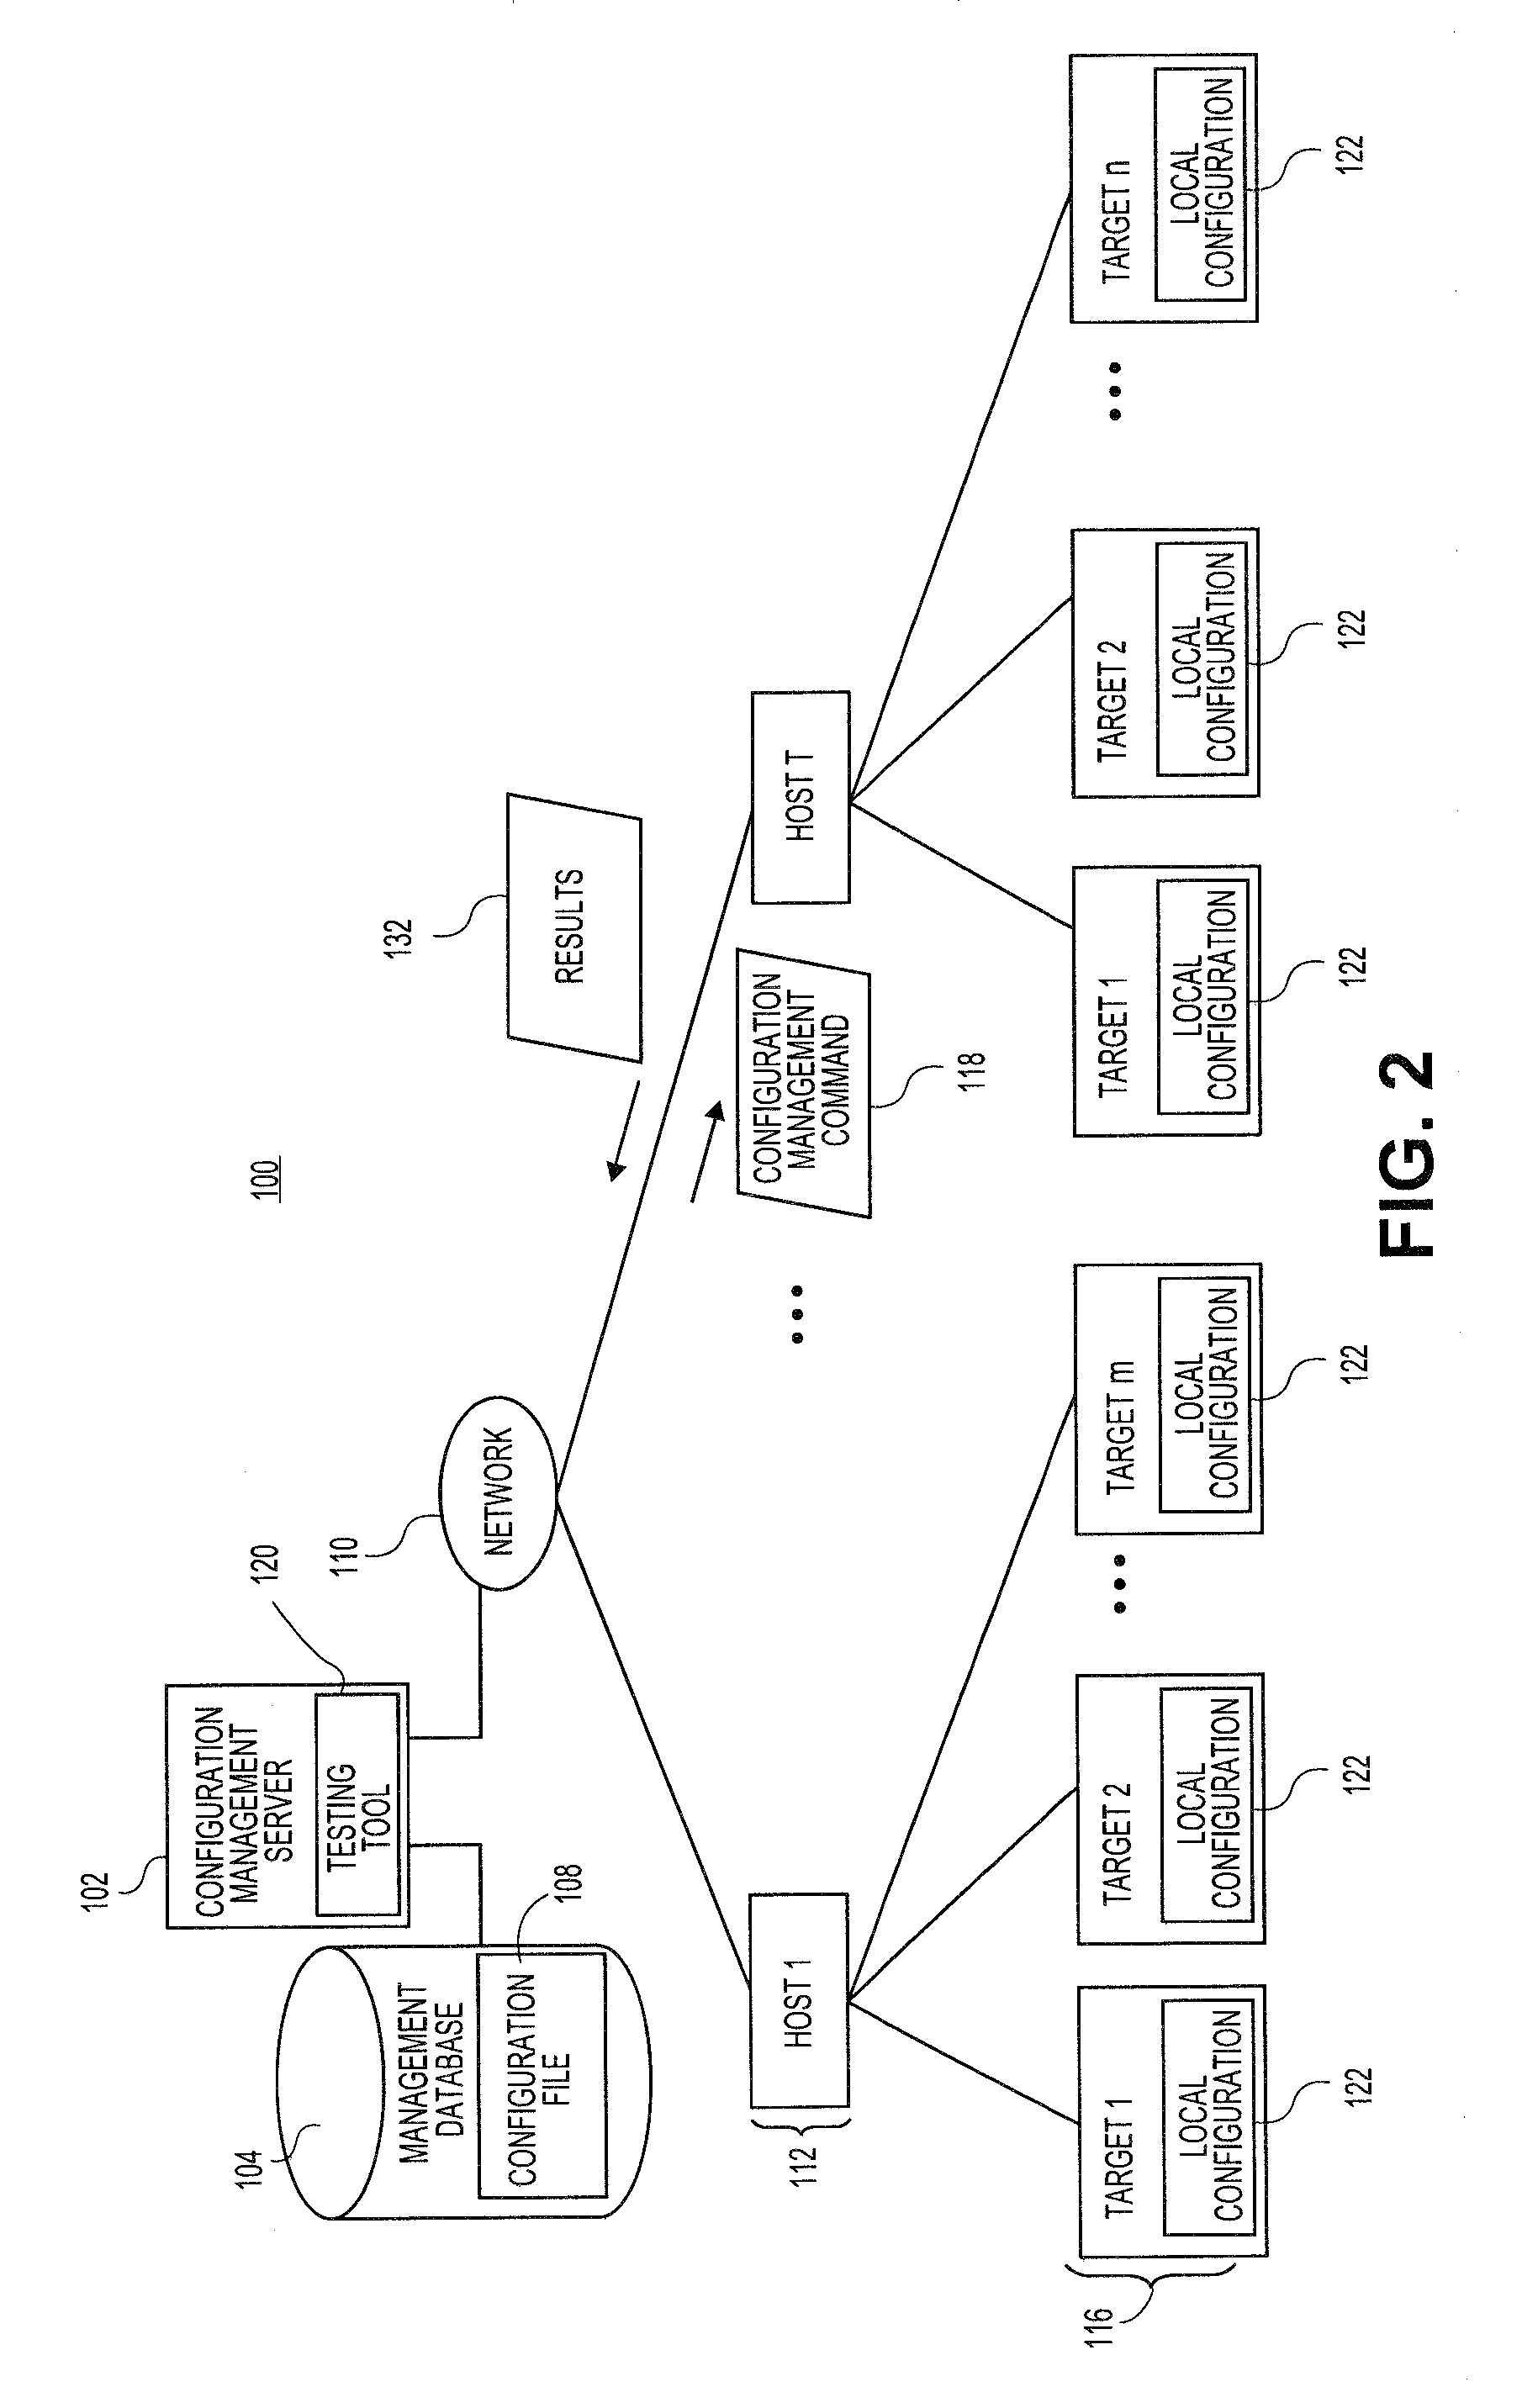 Systems and methods for testing results of configuration management activity